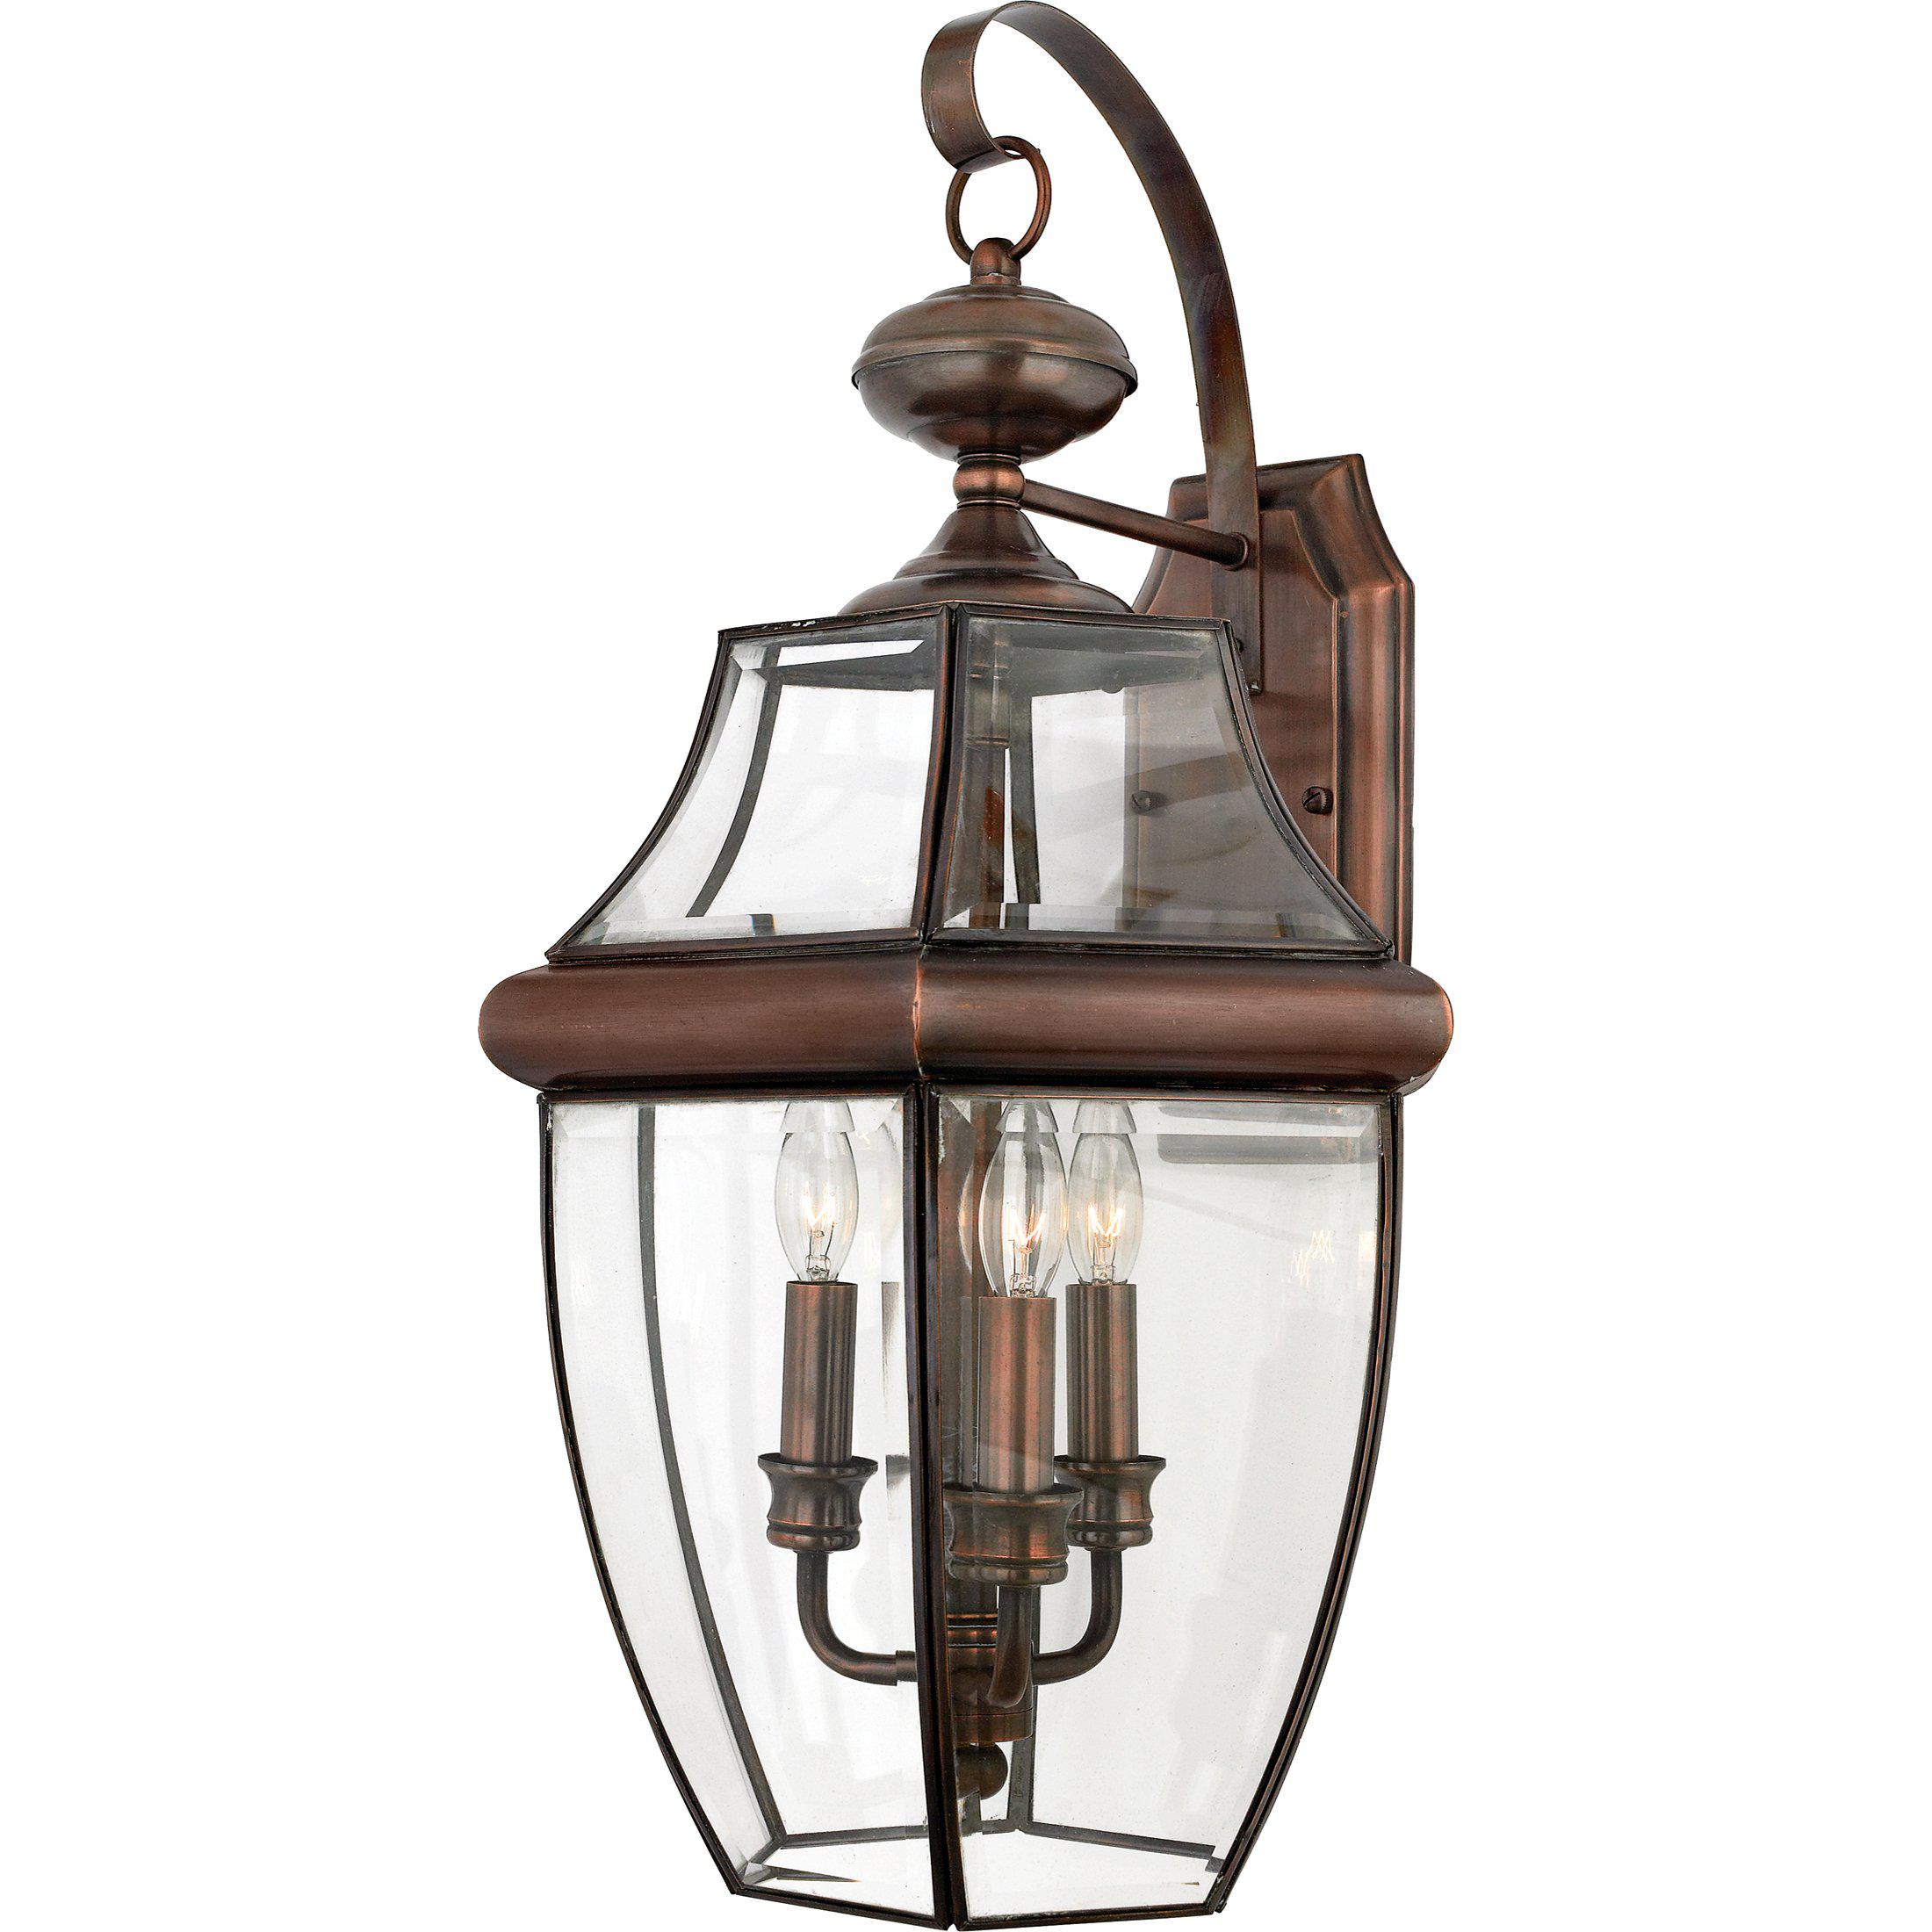 Quoizel  Newbury Outdoor Lantern, XL Outdoor l Wall Quoizel Aged Copper  